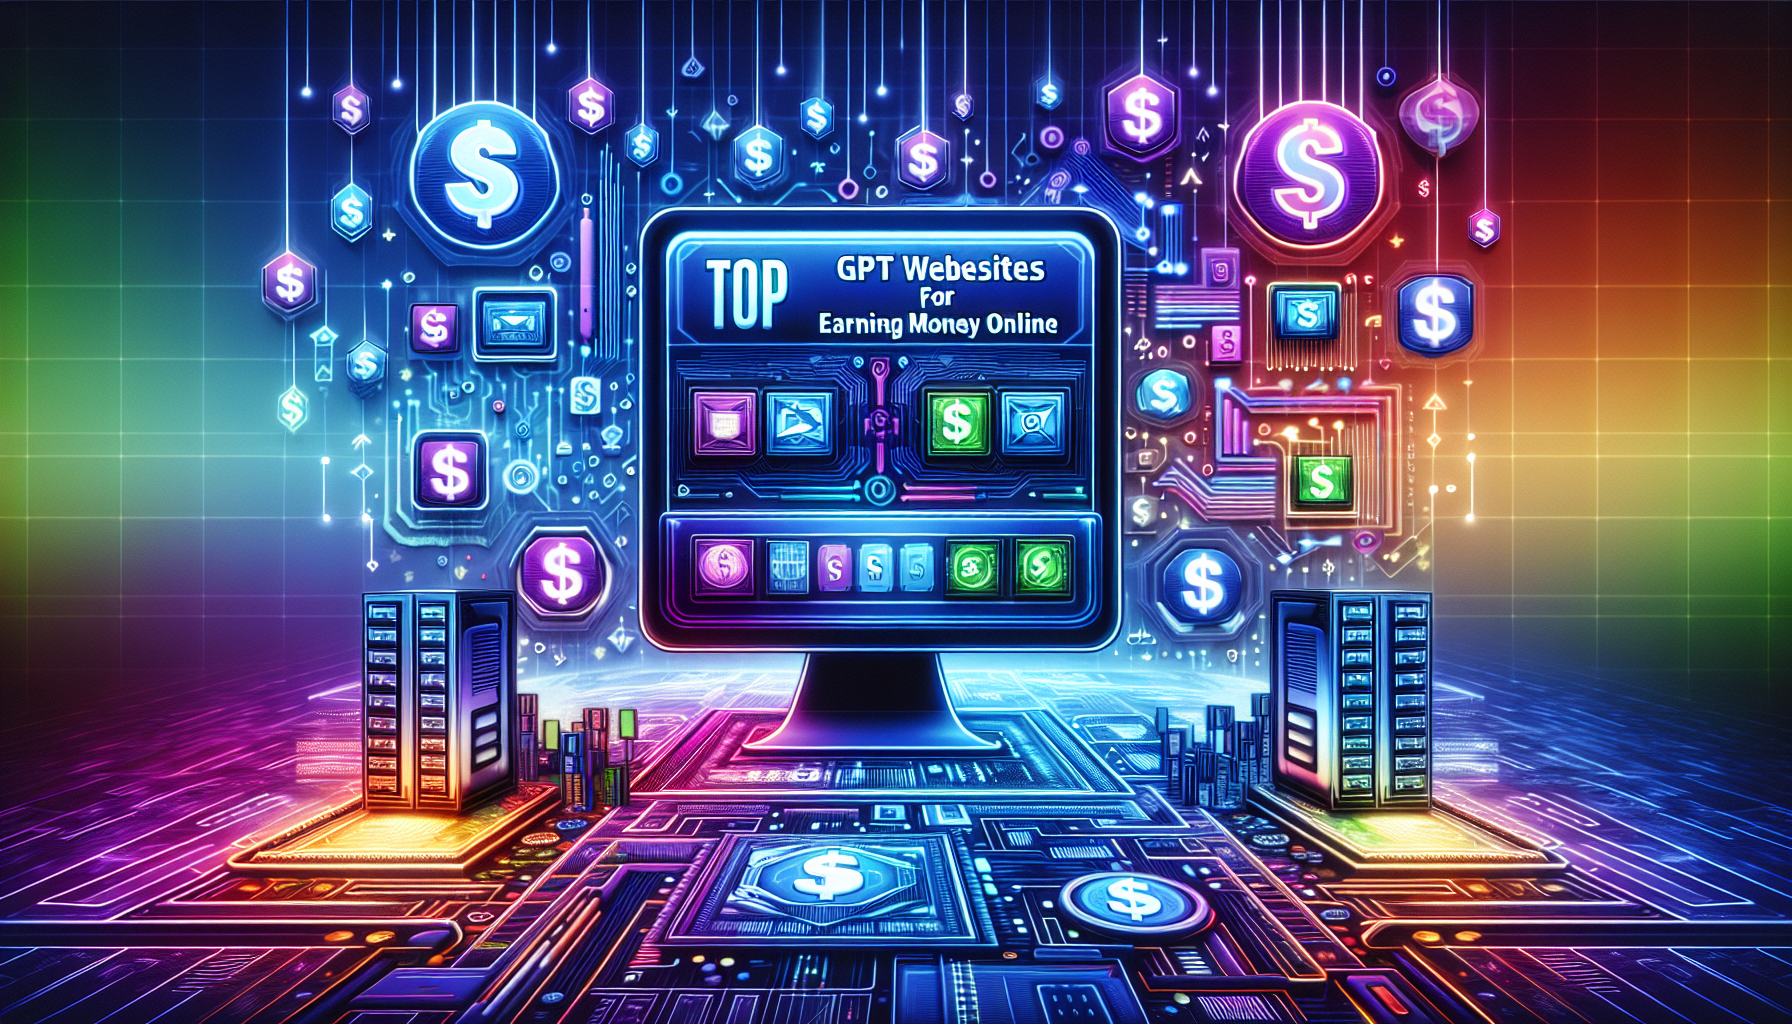 Create an illustration of a futuristic digital landscape with a central computer screen displaying the title Top 12 GPT Websites for Earning Money Online. Surround the screen with various icons repres